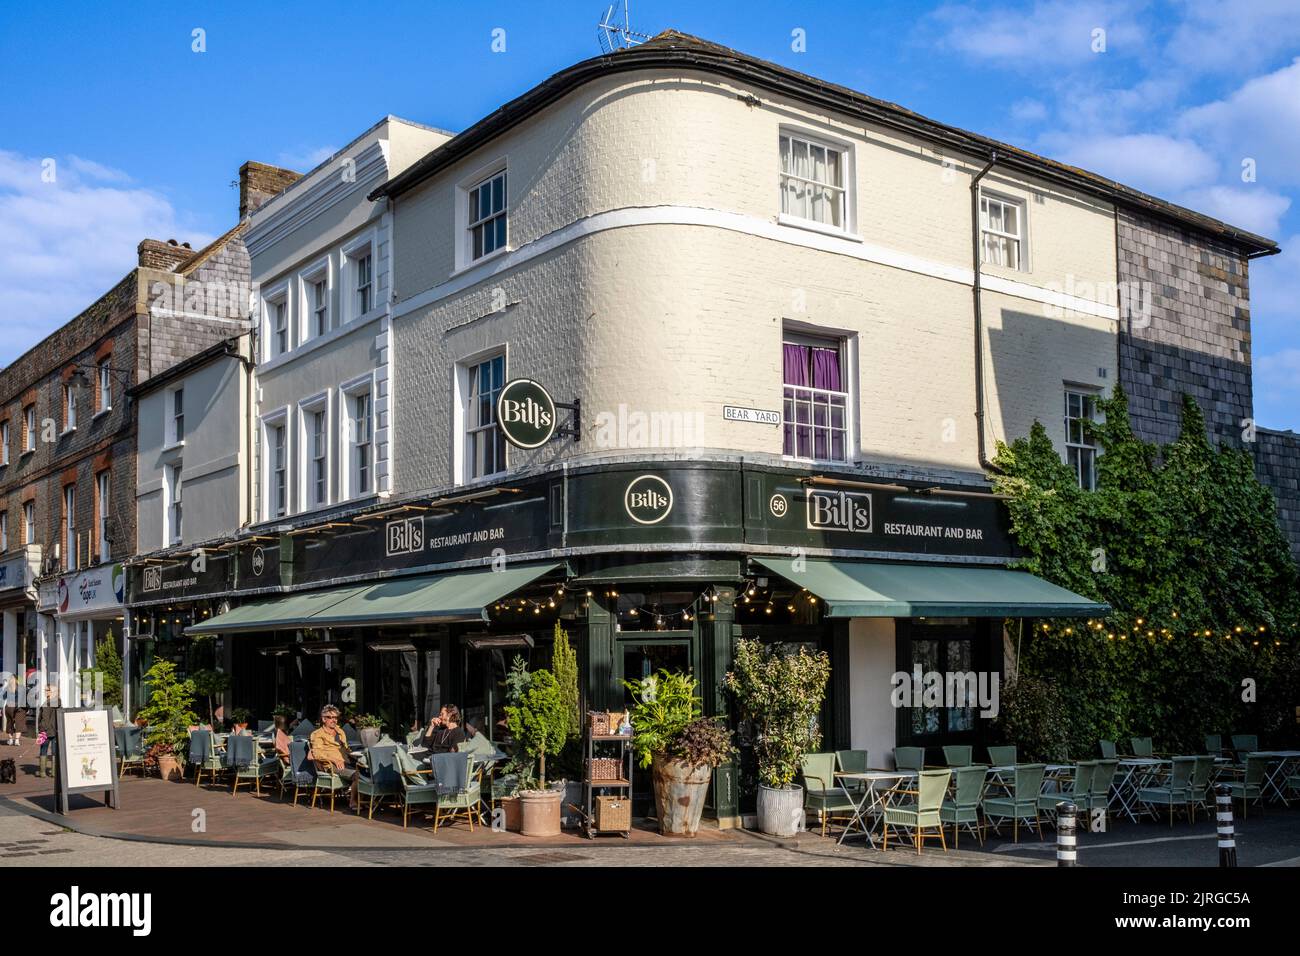 Bills Restaurant and Bar, High Street, East Sussex, Regno Unito. Foto Stock